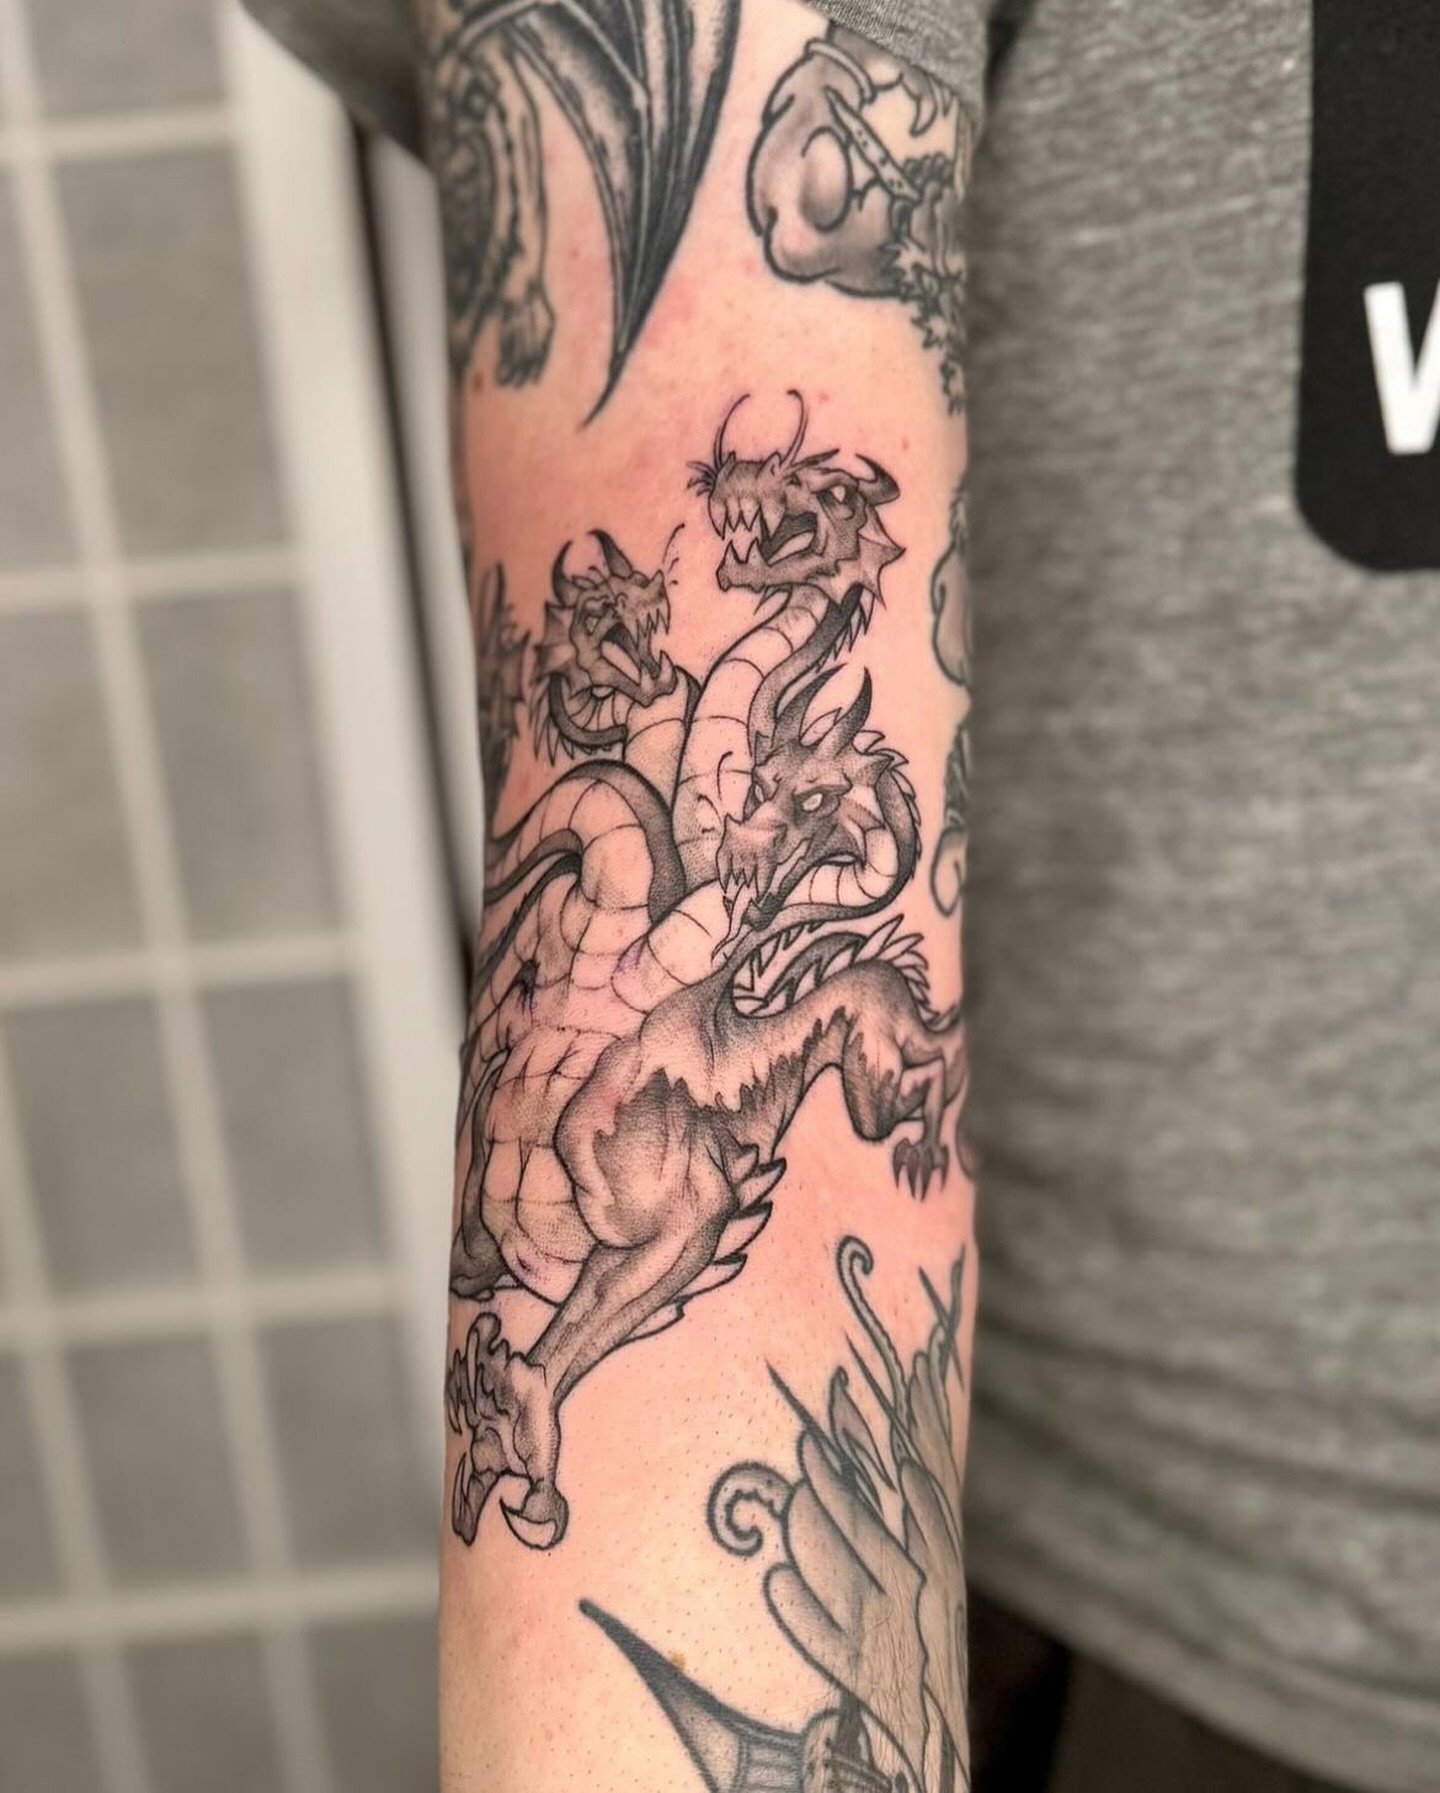 Micaeah @micaink_ does sick tattoos, no doubt. This Hydra Filler in this Monster Sleeve for Landon is incredible&hellip; but also, Micaeah brings such a joyful presence to the shop. It&rsquo;s obvious when she&rsquo;s off adventuring (yay! 🎉 but) sh